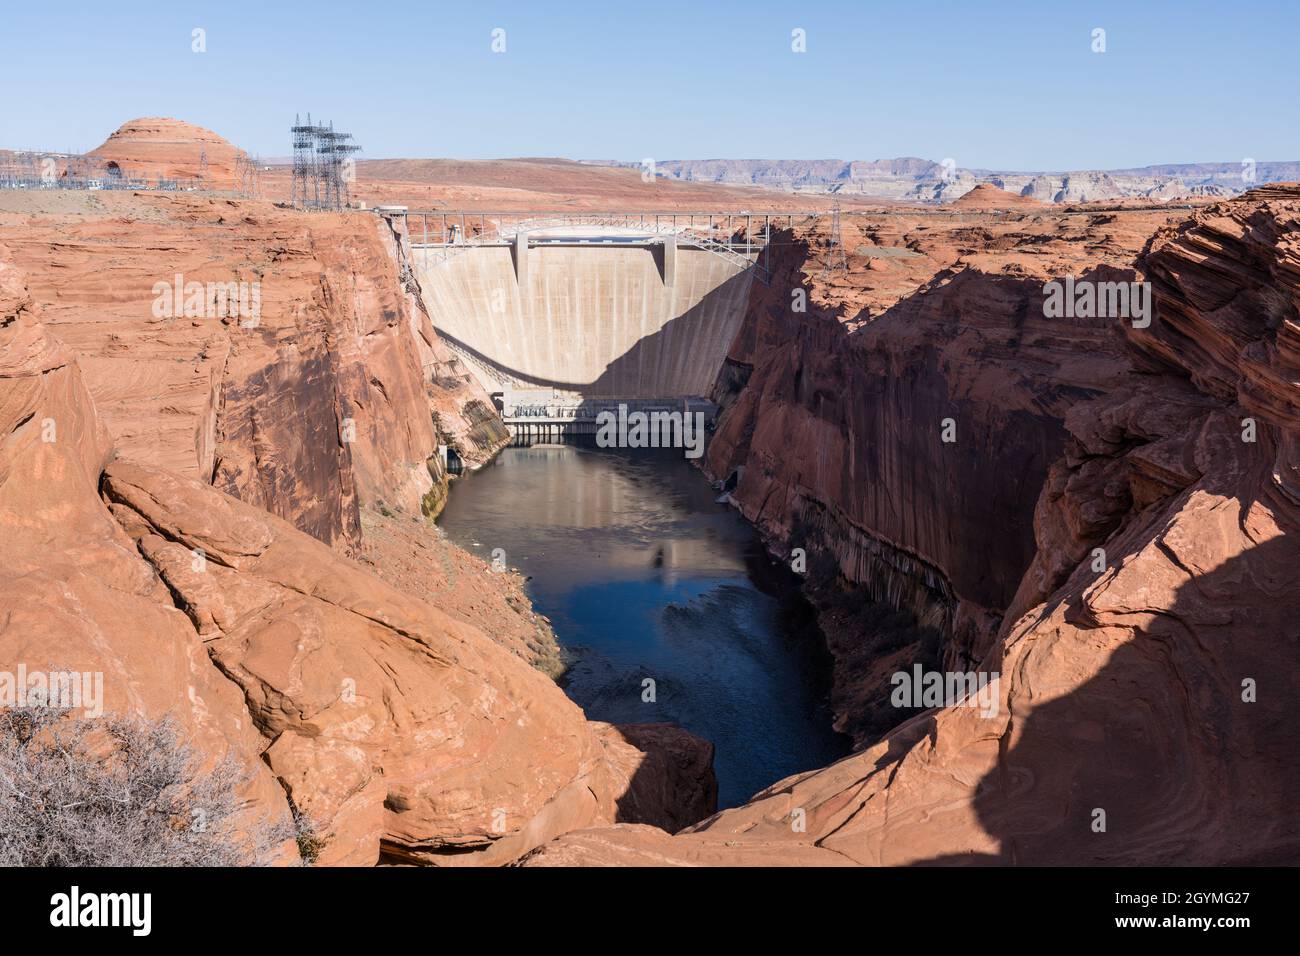 View of Glen Canyon Dam which impounds Lake Powell on the Colorado River, a source of clean hydroelectric power. Stock Photo